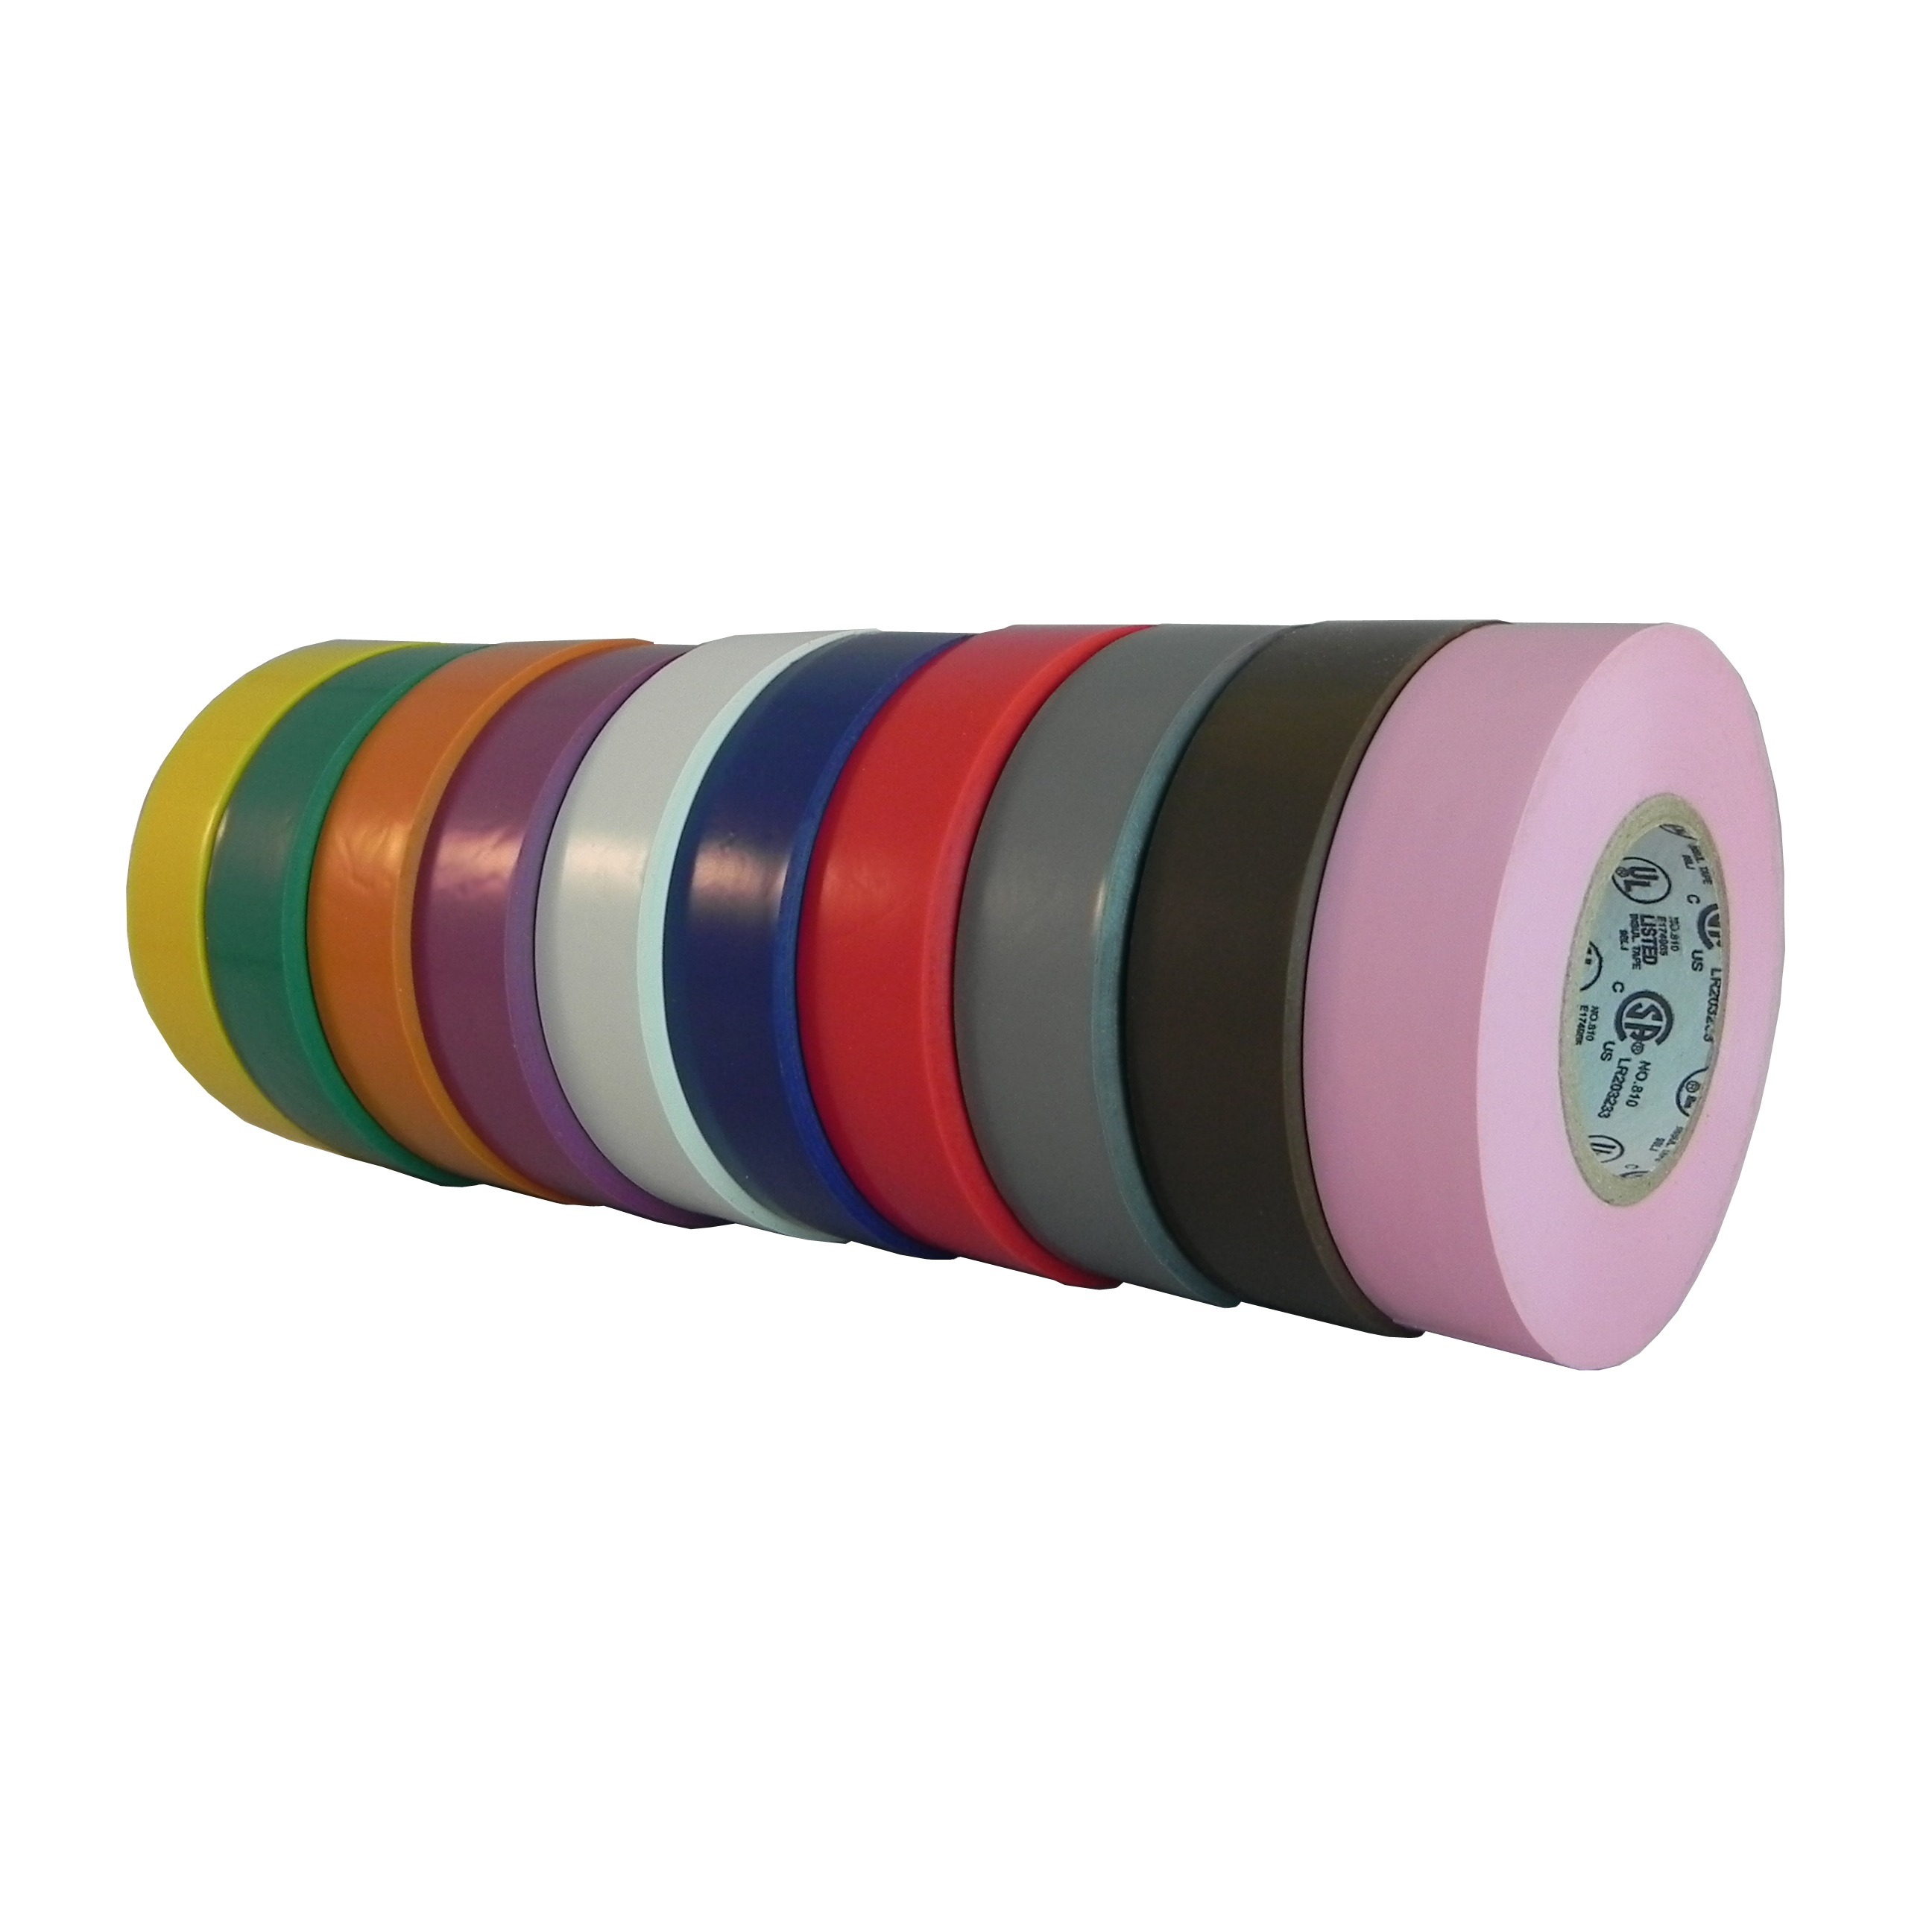 FULL CASE TapesSupply 100 Rolls Rainbow Electrical Tape 3/4" x 66 ft 